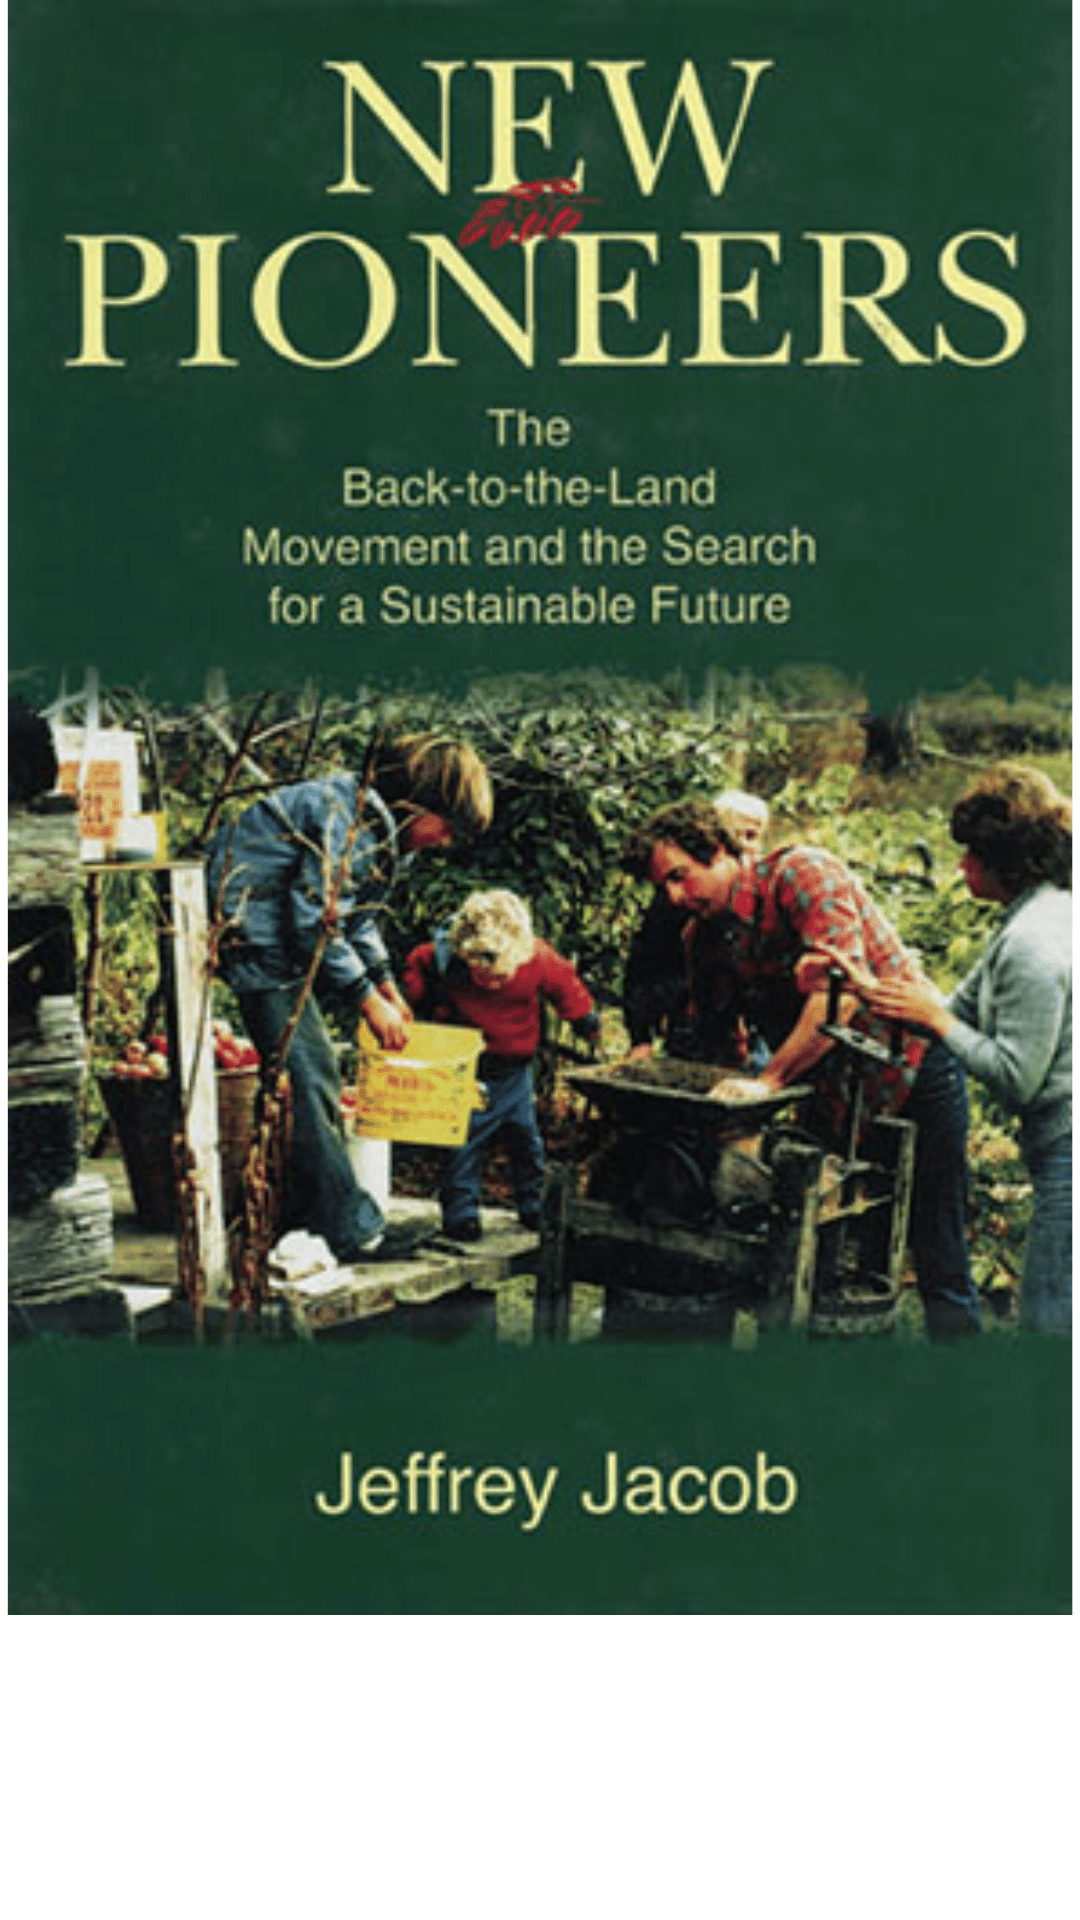 New Pioneers: The Back-to-the-land Movement and the Search for a Sustainable Future